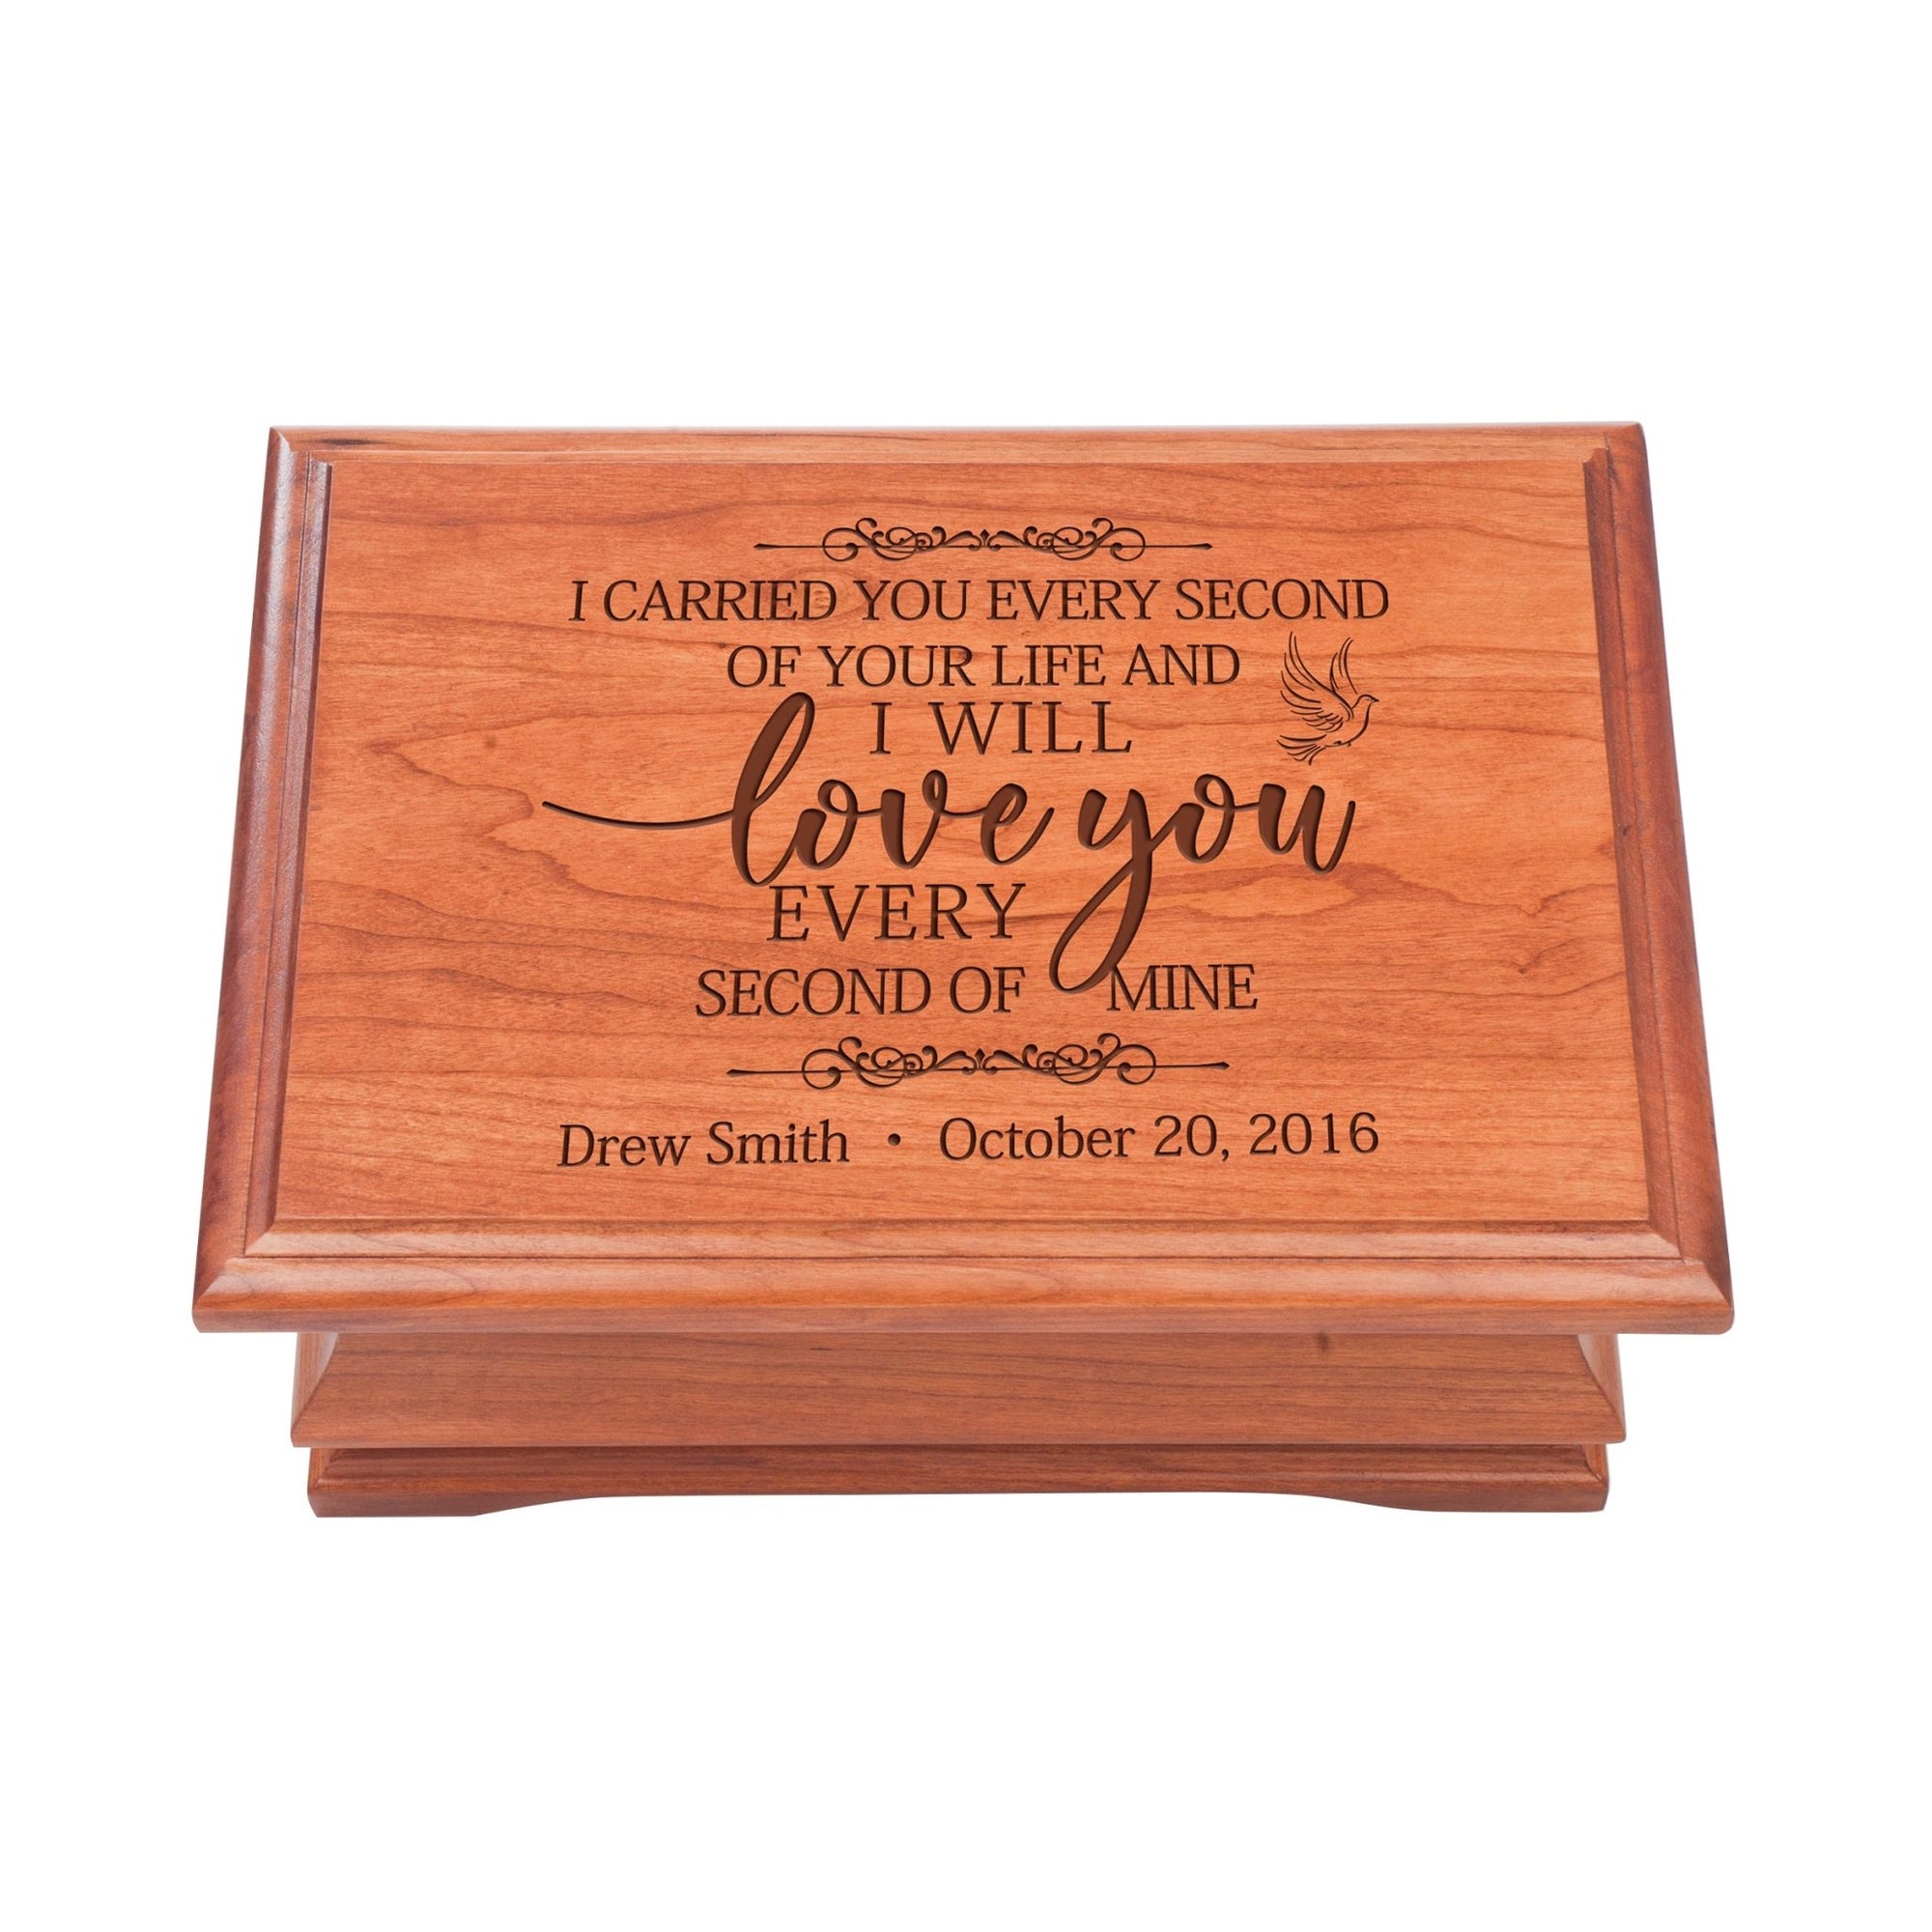 Personalized Wooden Memorial Jewelry Box Organizer 11.5x8.25 – I Carried You Every Second - LifeSong Milestones